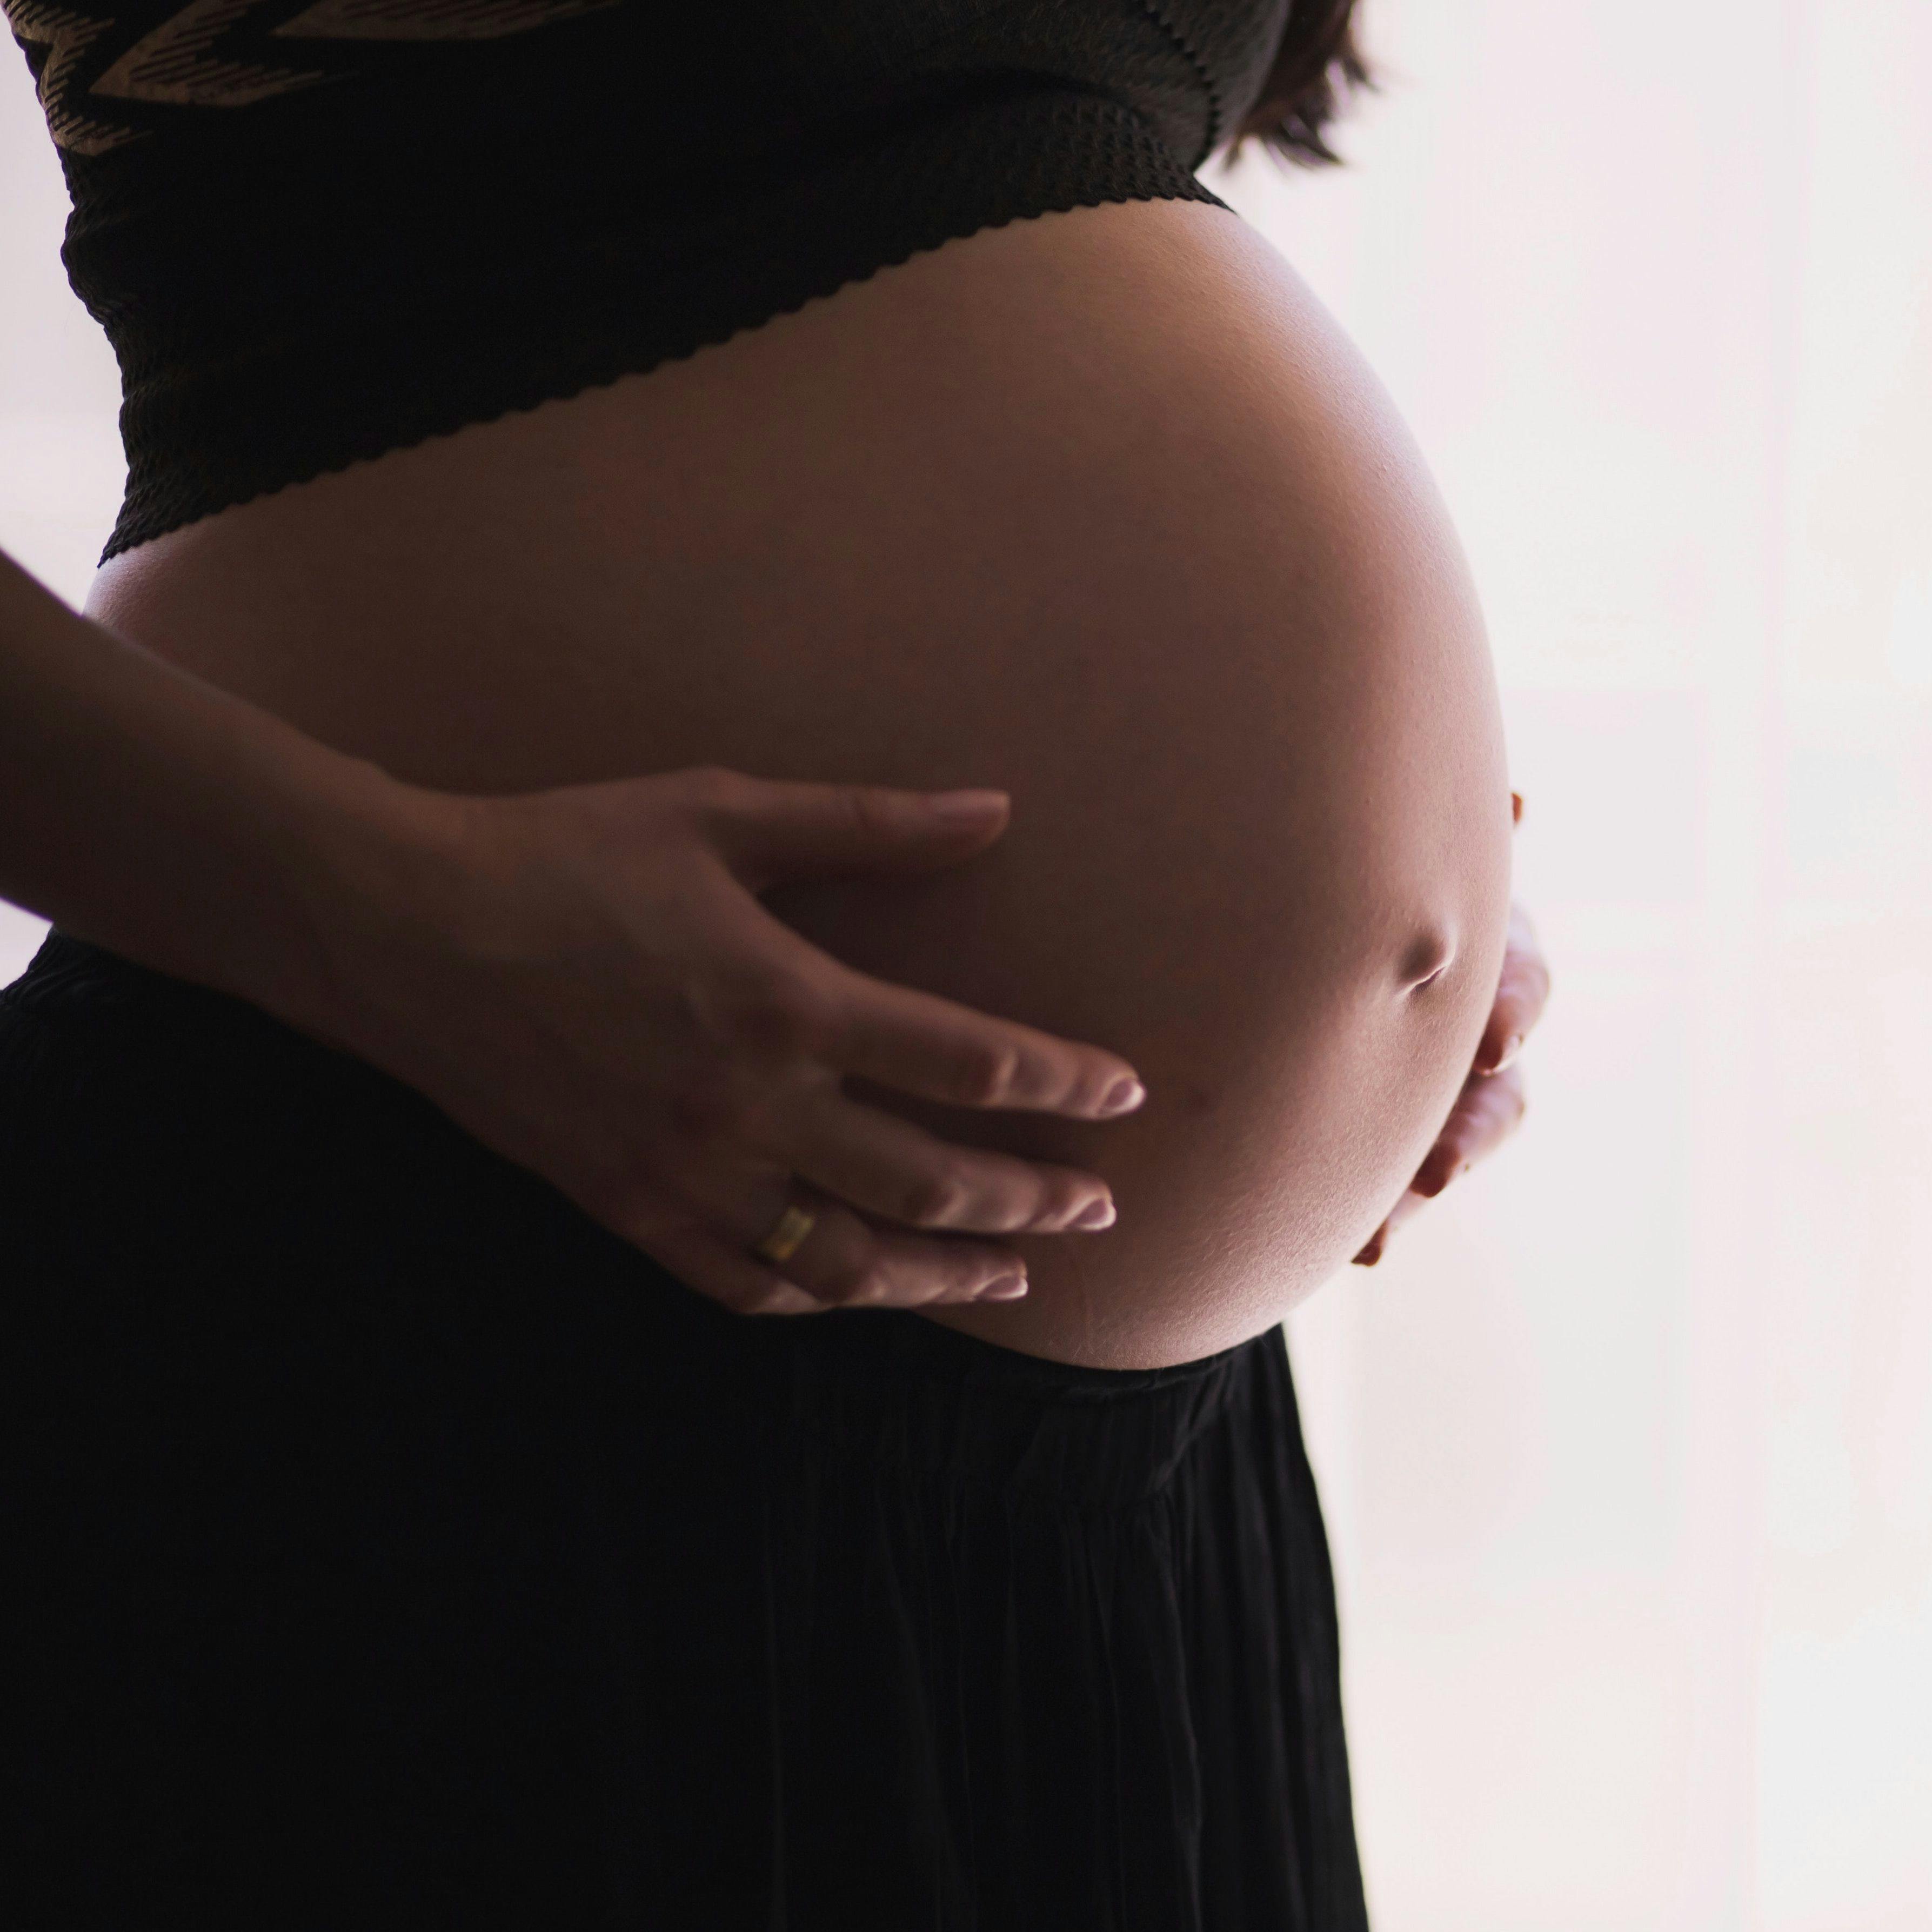 Lower Maternal Hemoglobin Concentration Linked to Faster Fetal Growth, Larger Birth Weight